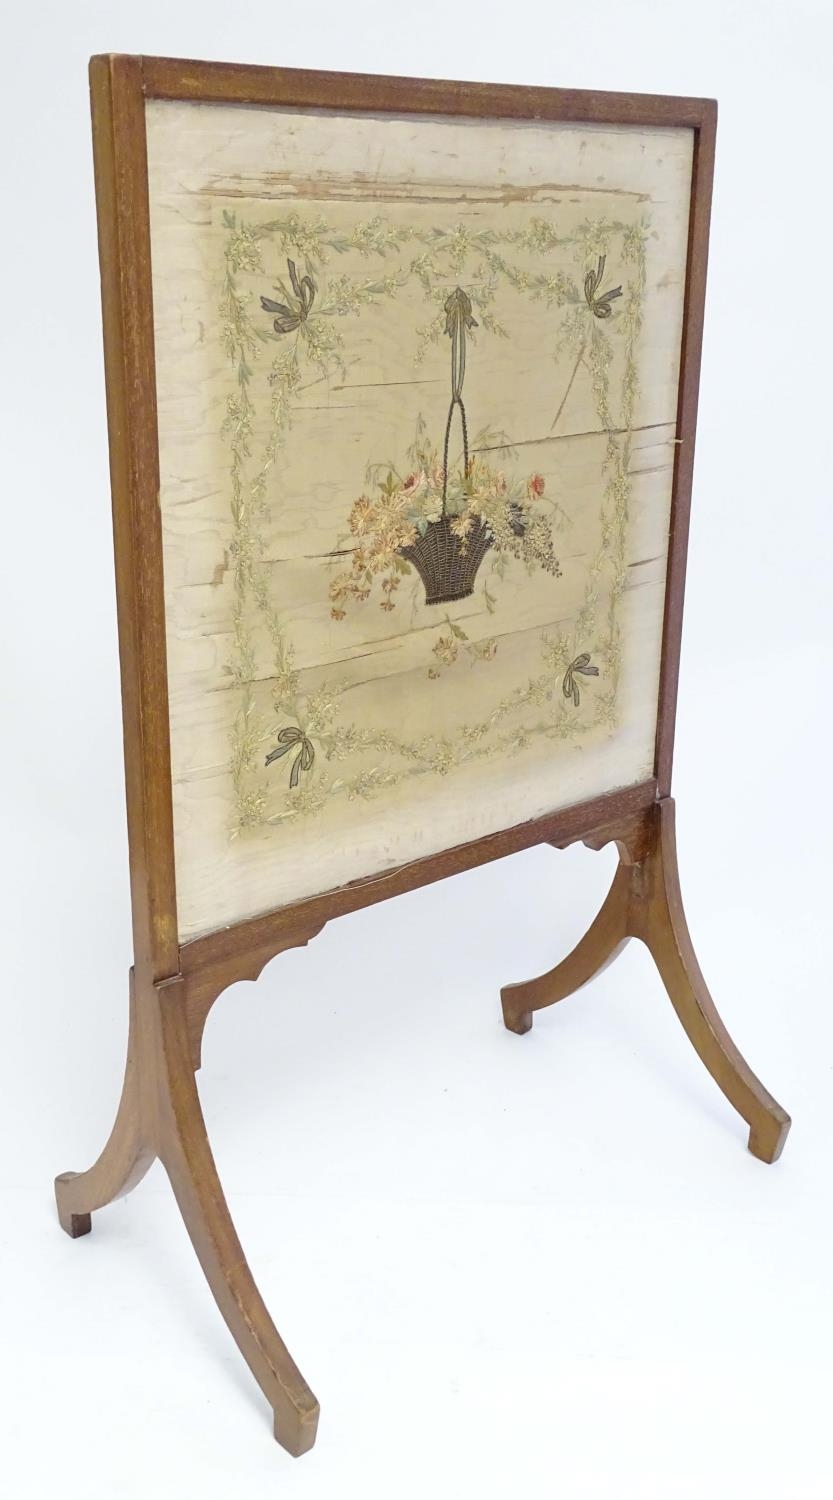 An early 19thC silk needlework with fine floral decoration, bows, swags and a woven basket in a - Image 6 of 10